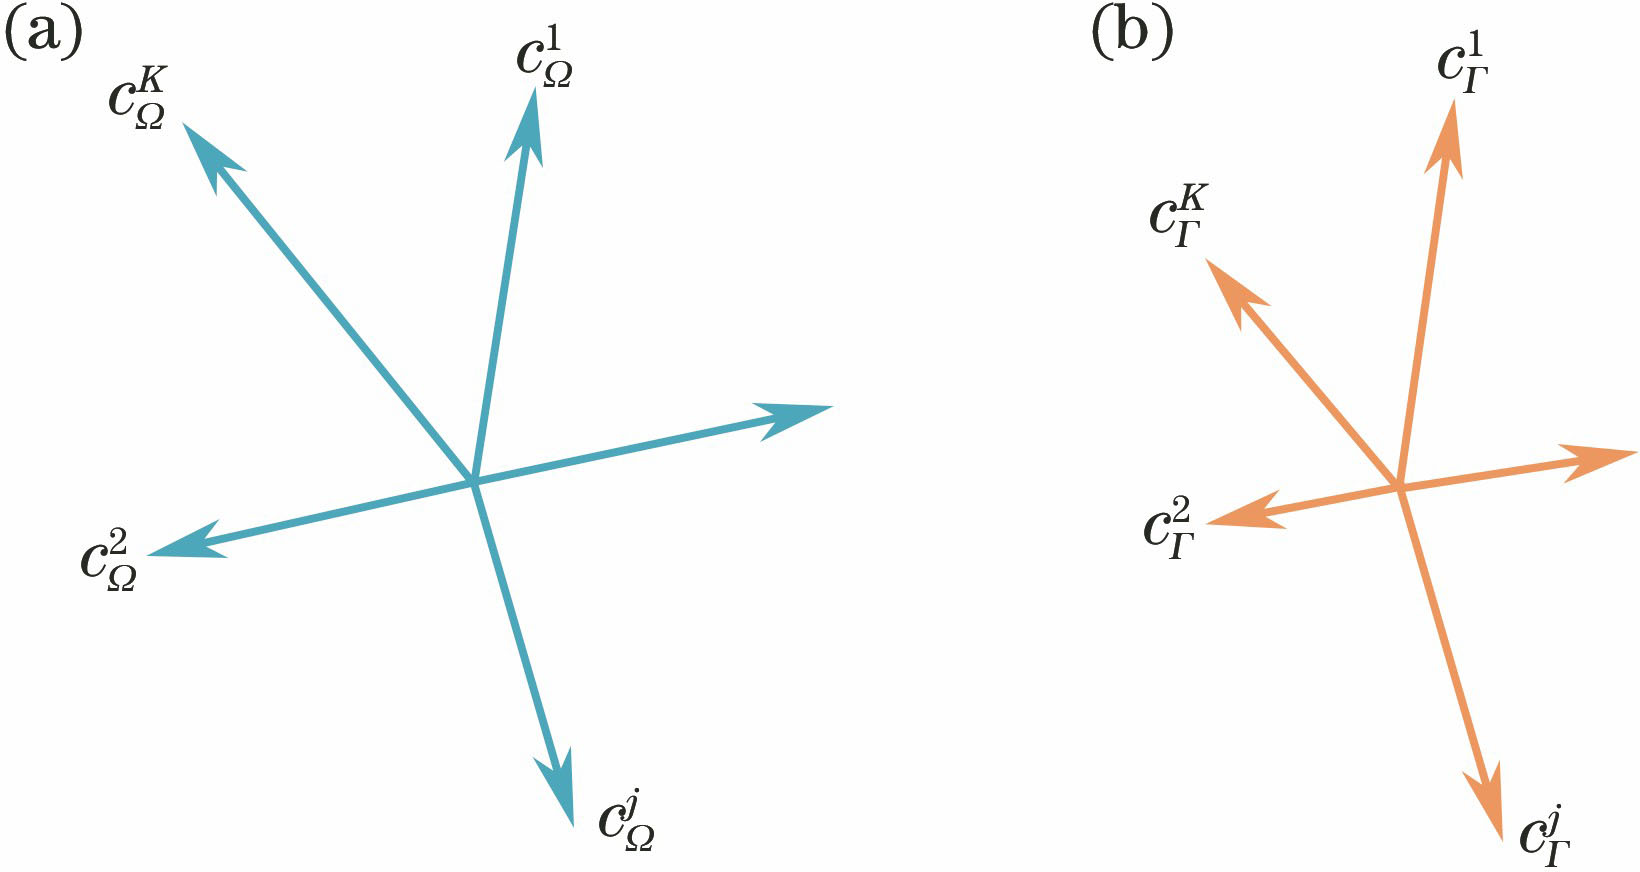 Global vector features. (a) In Ω; (b) in Γ